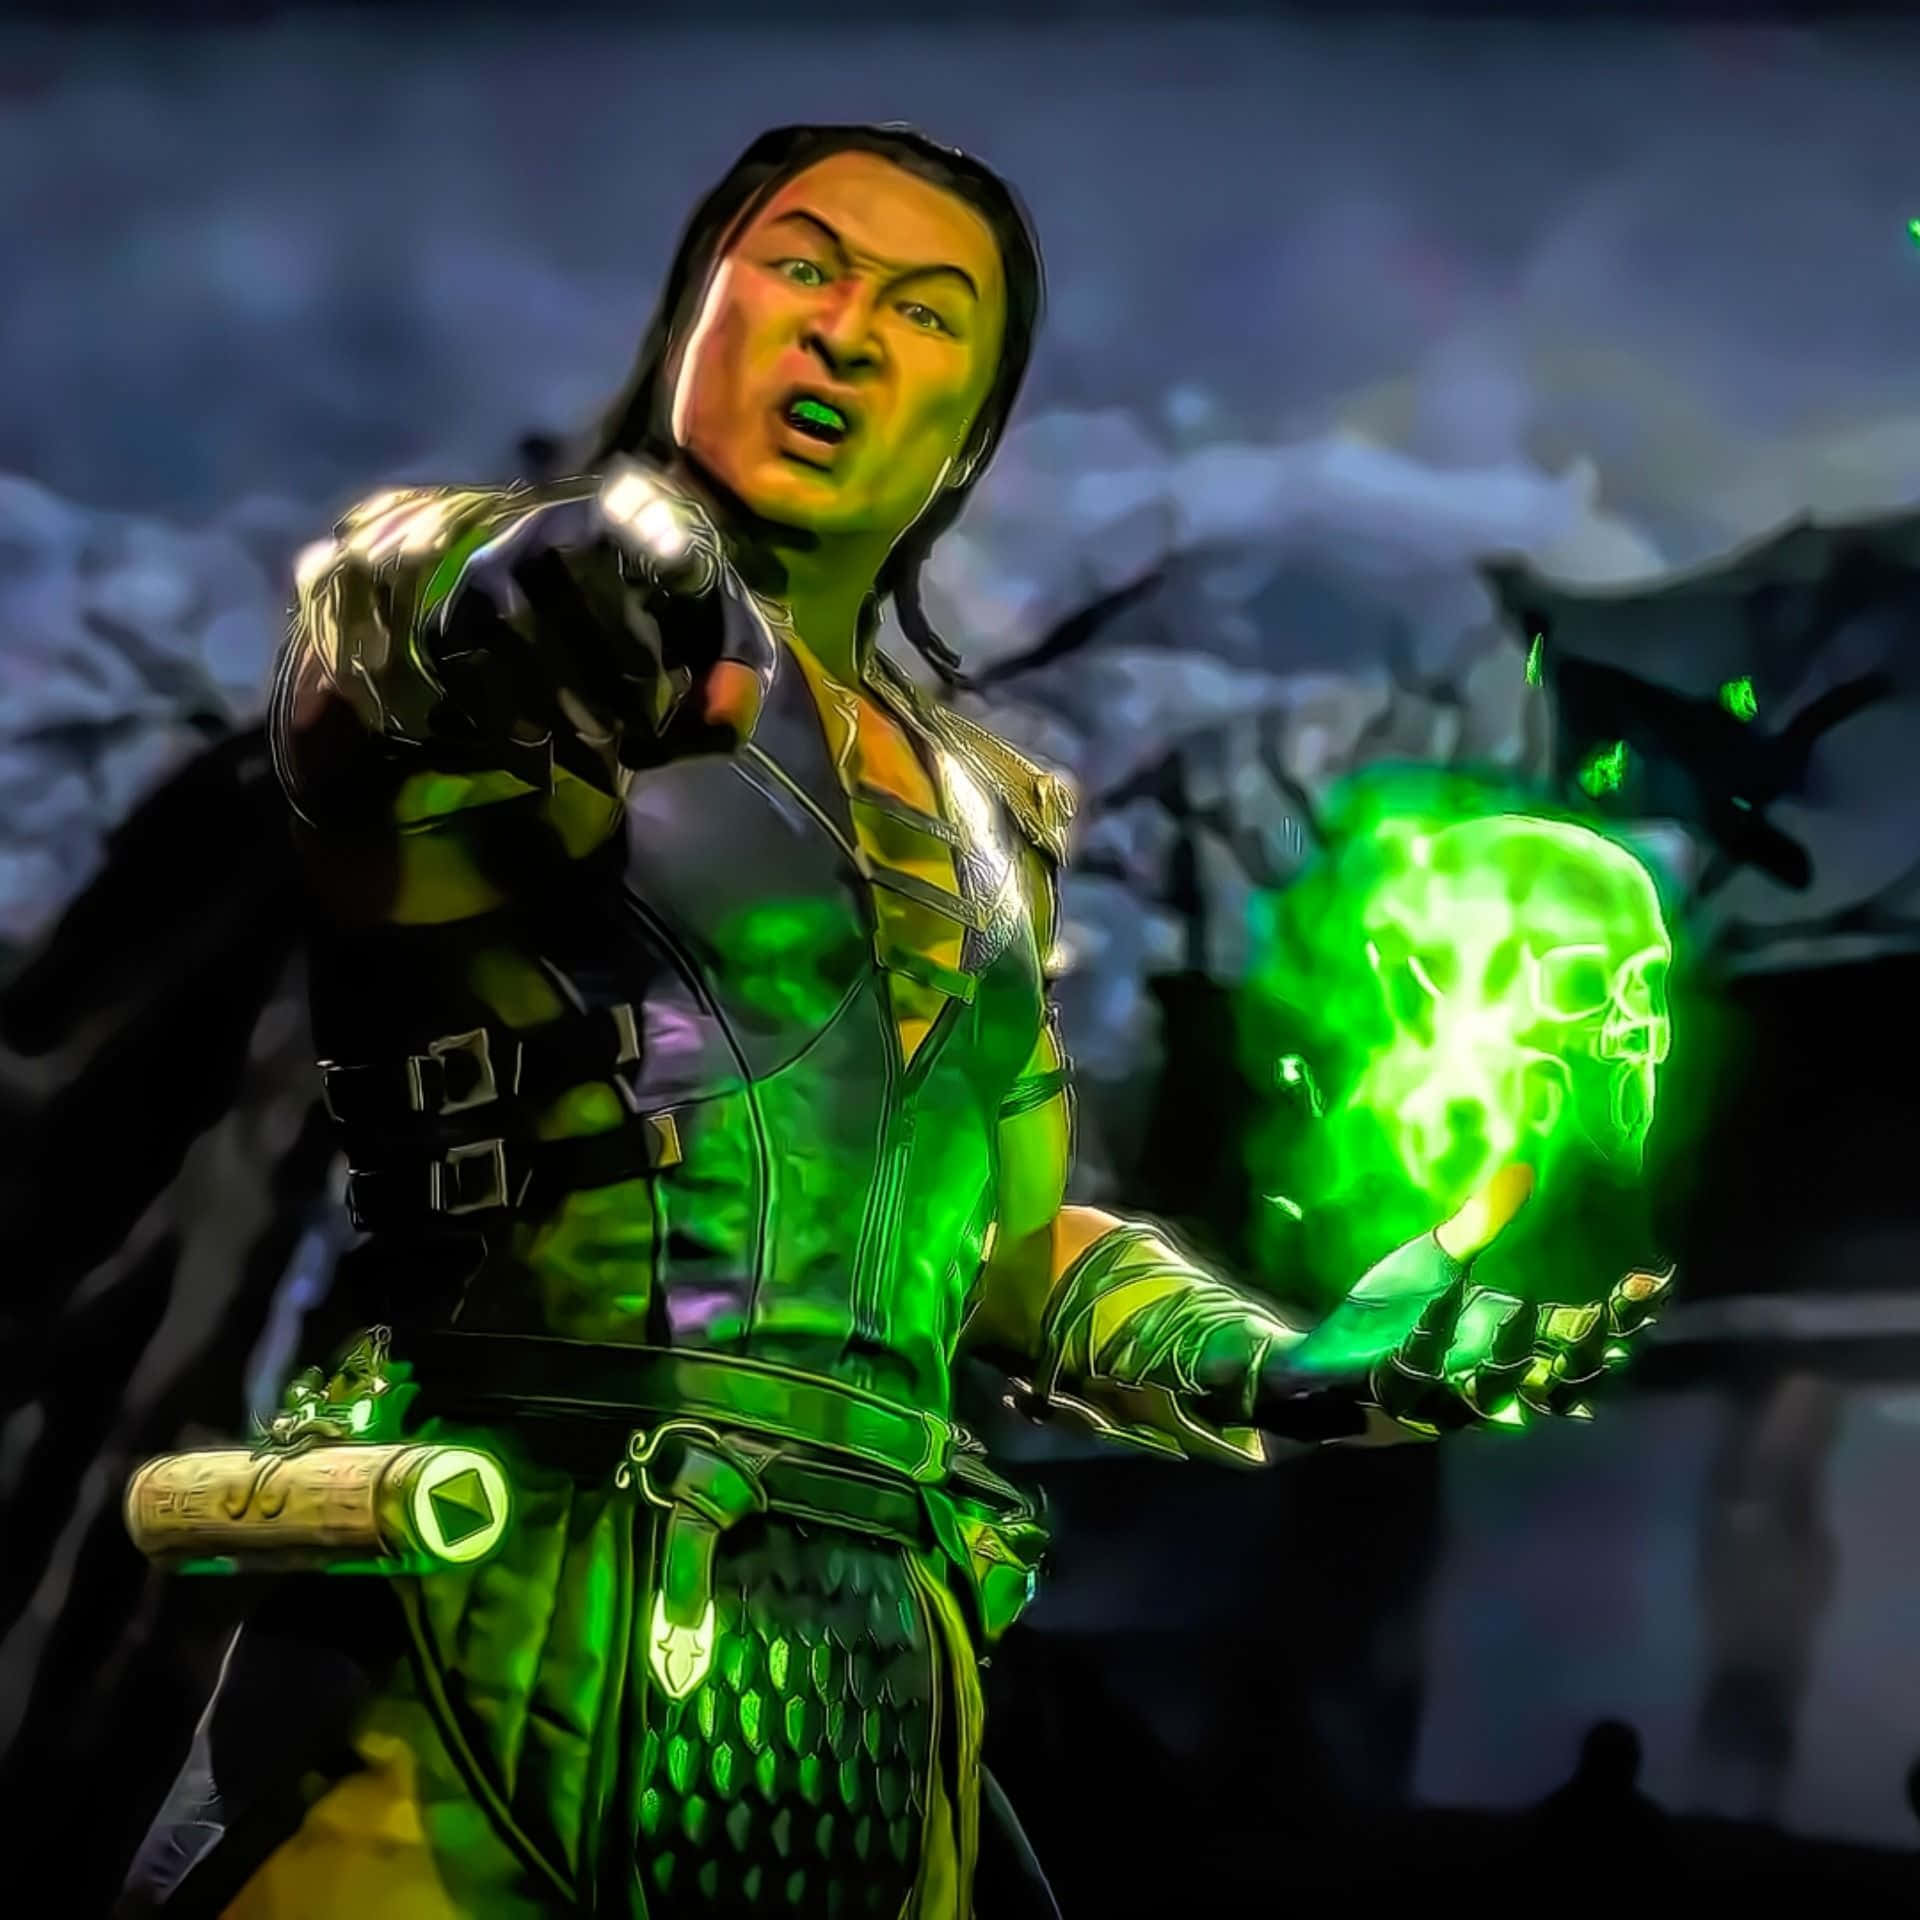 Shang Tsung Posters for Sale